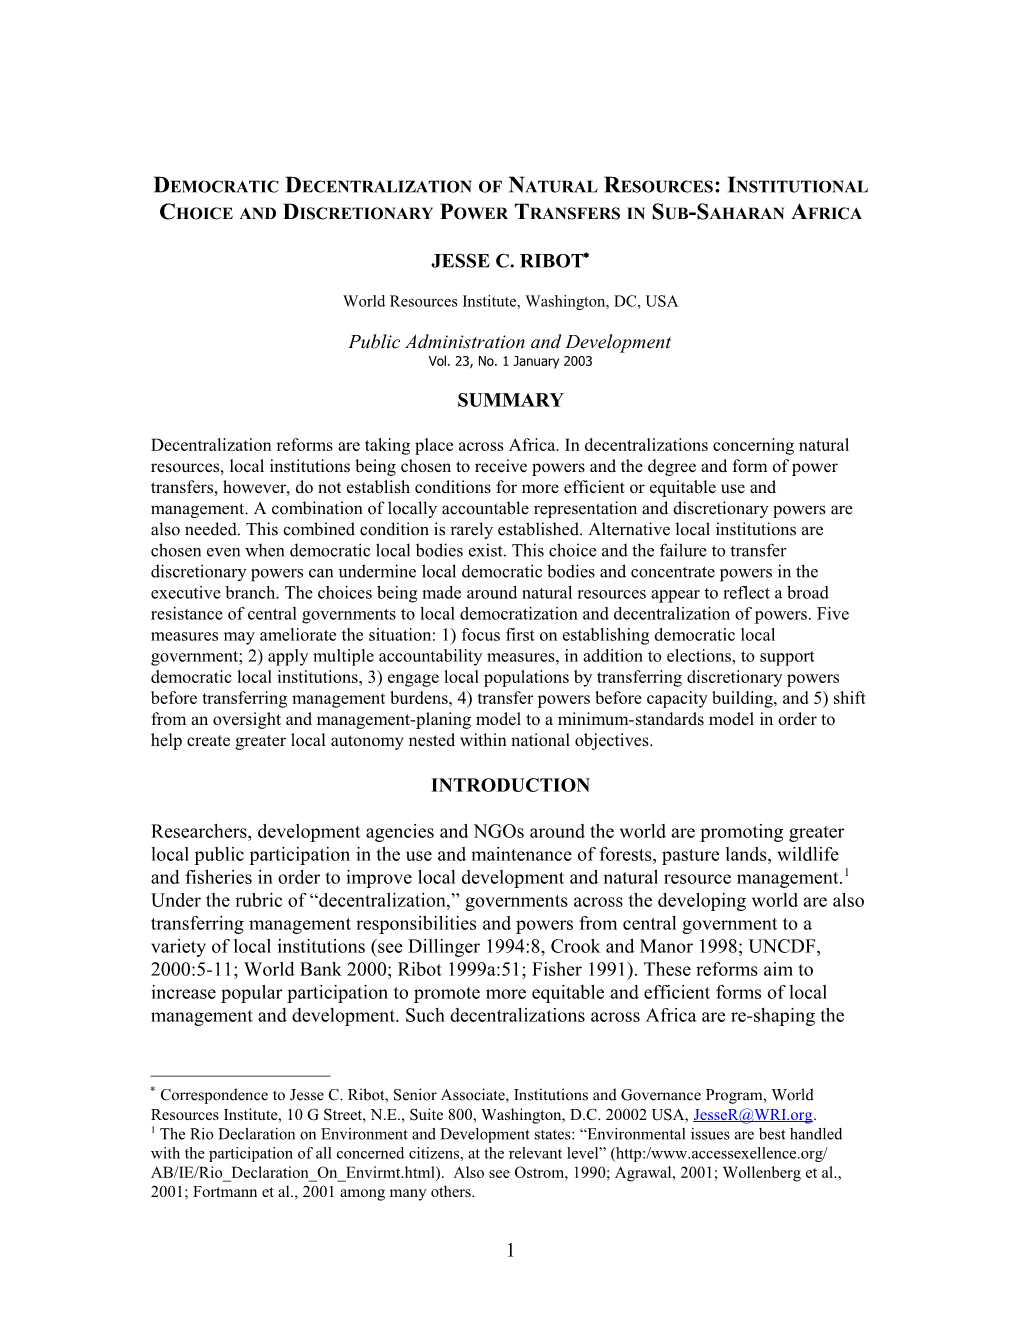 Democratic Decentralization and Natural Resources in Sub-Saharan Africa: Power Transfers